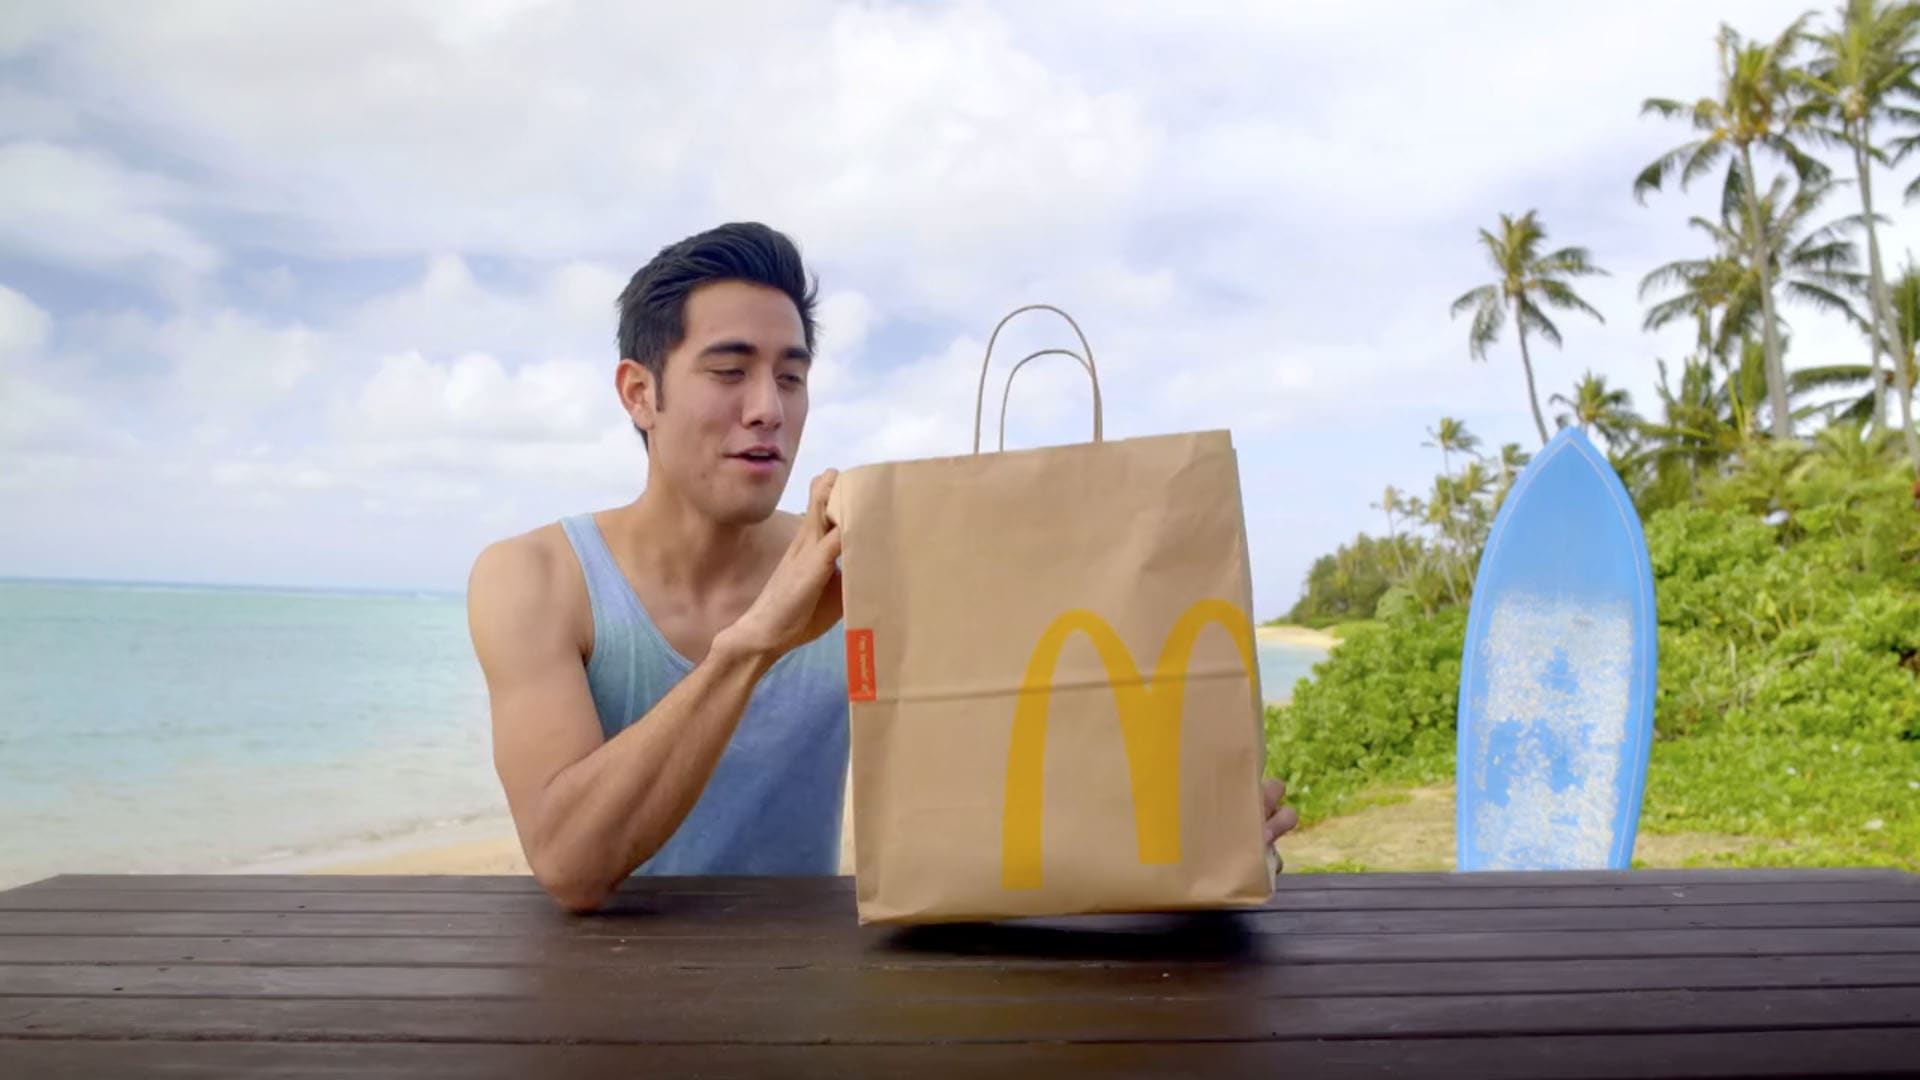 McDonald’s of Hawaii: Amazing Ingredients Campaign - How Zach King refuels after dawn patrol